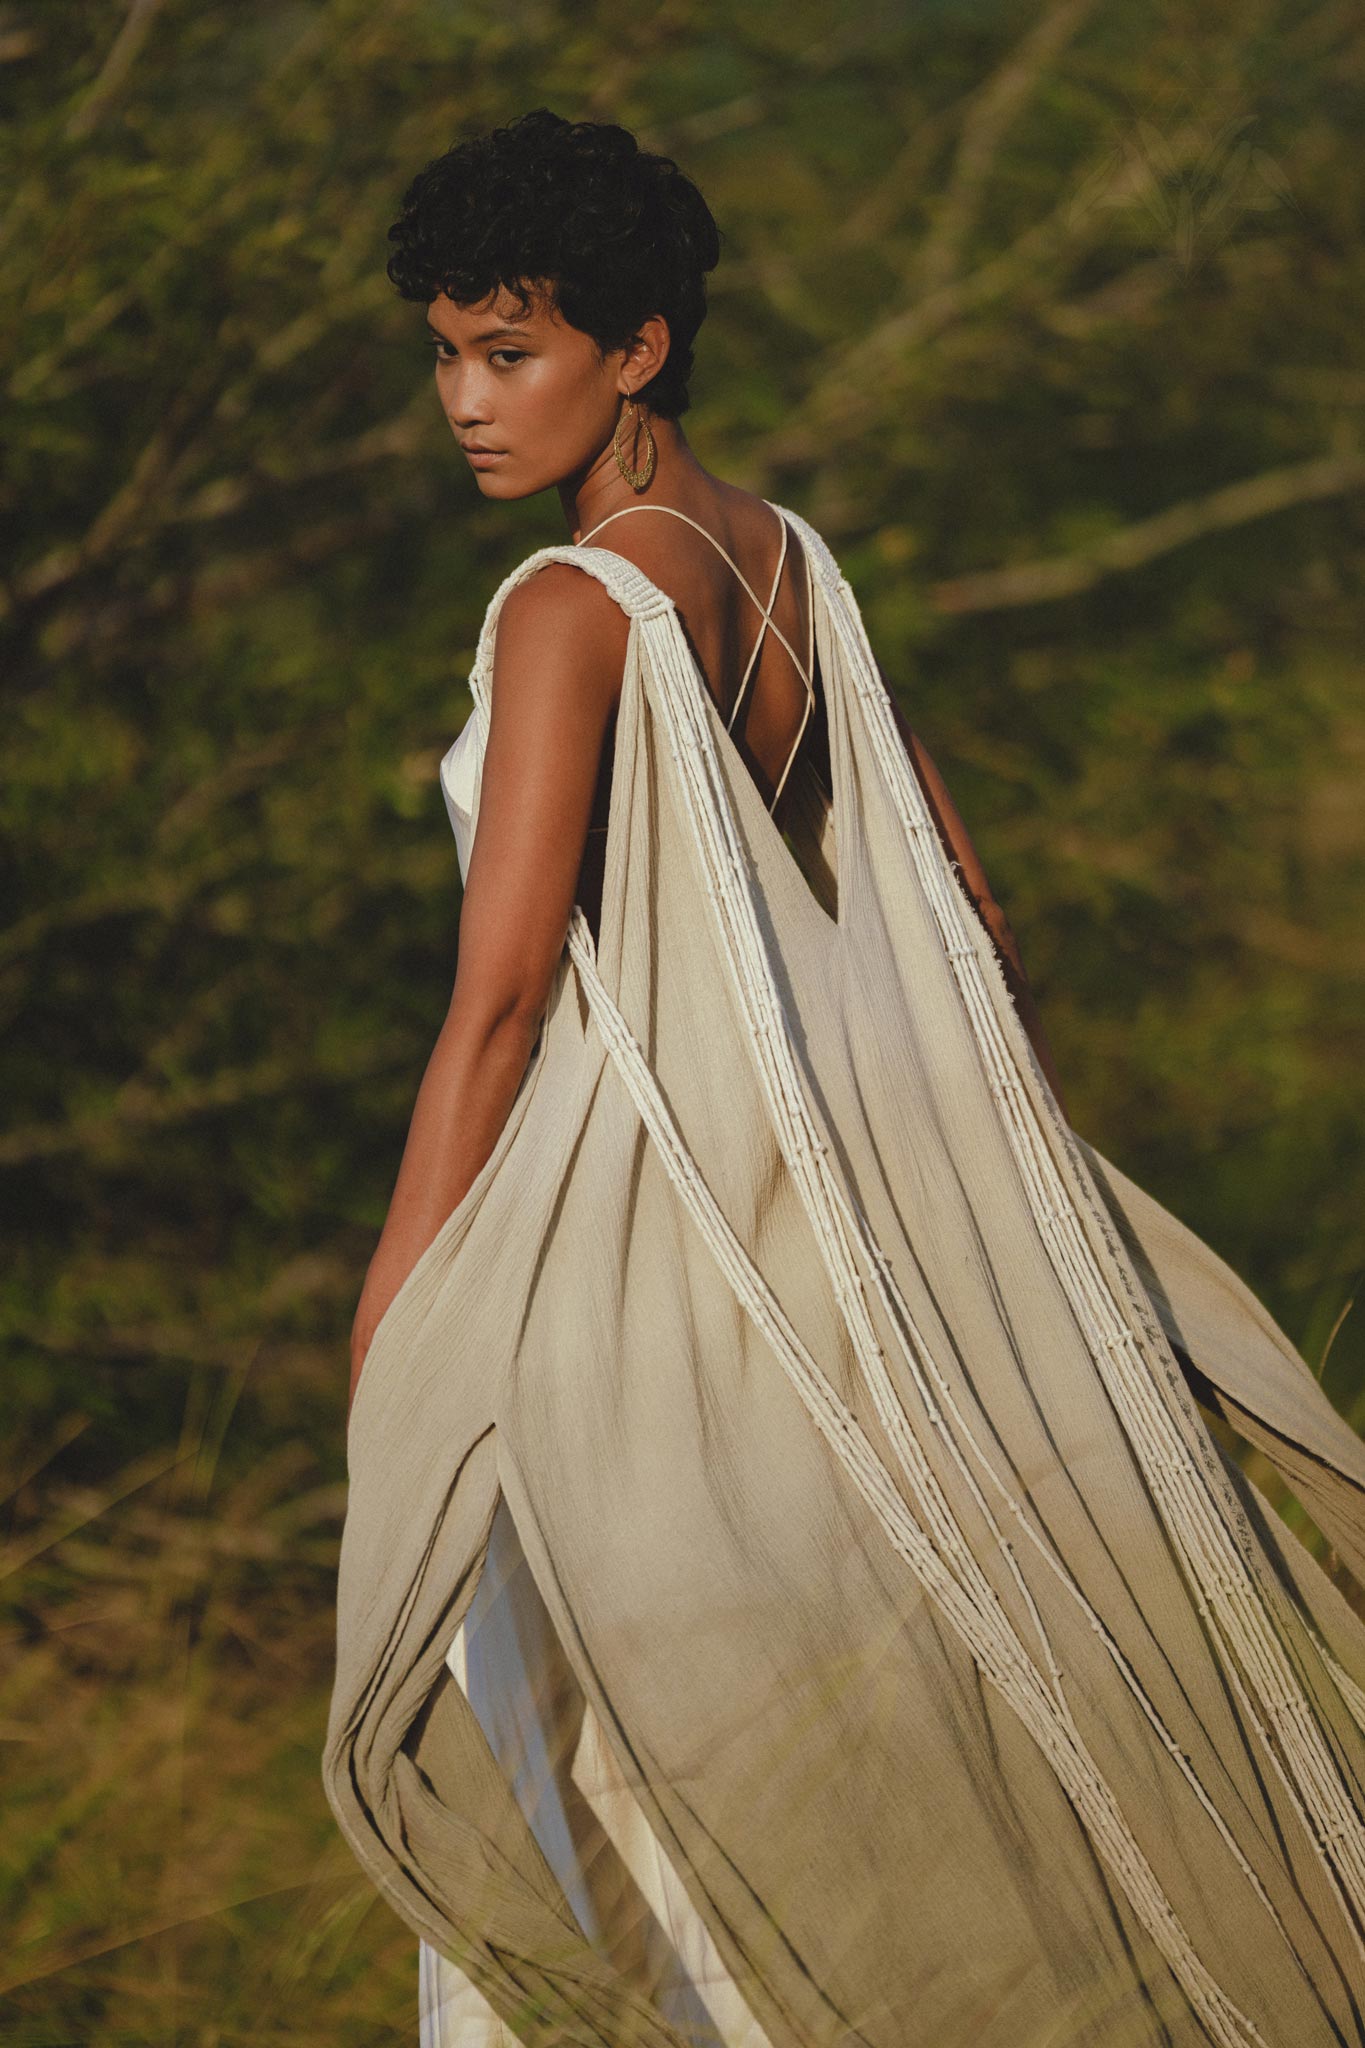 Look effortlessly stylish with this beautiful Macrame Cape by Aya Sacred Wear.